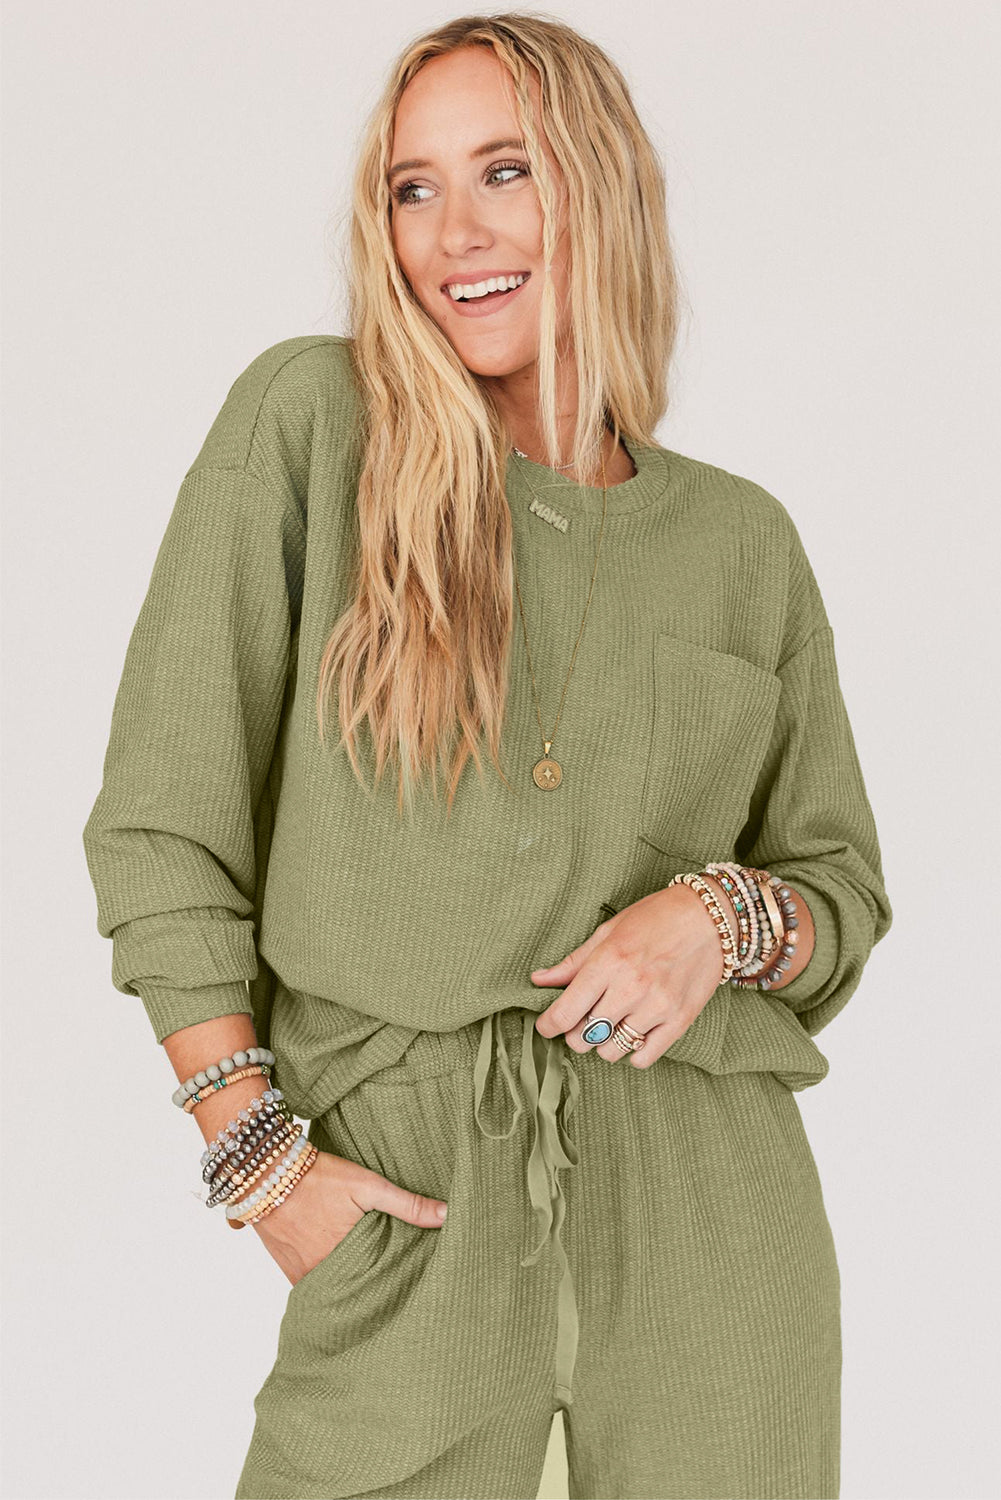 The802Gypsy  outfit sets TRAVELING GYPSY-Long Sleeve Top Drawstring Casual Set